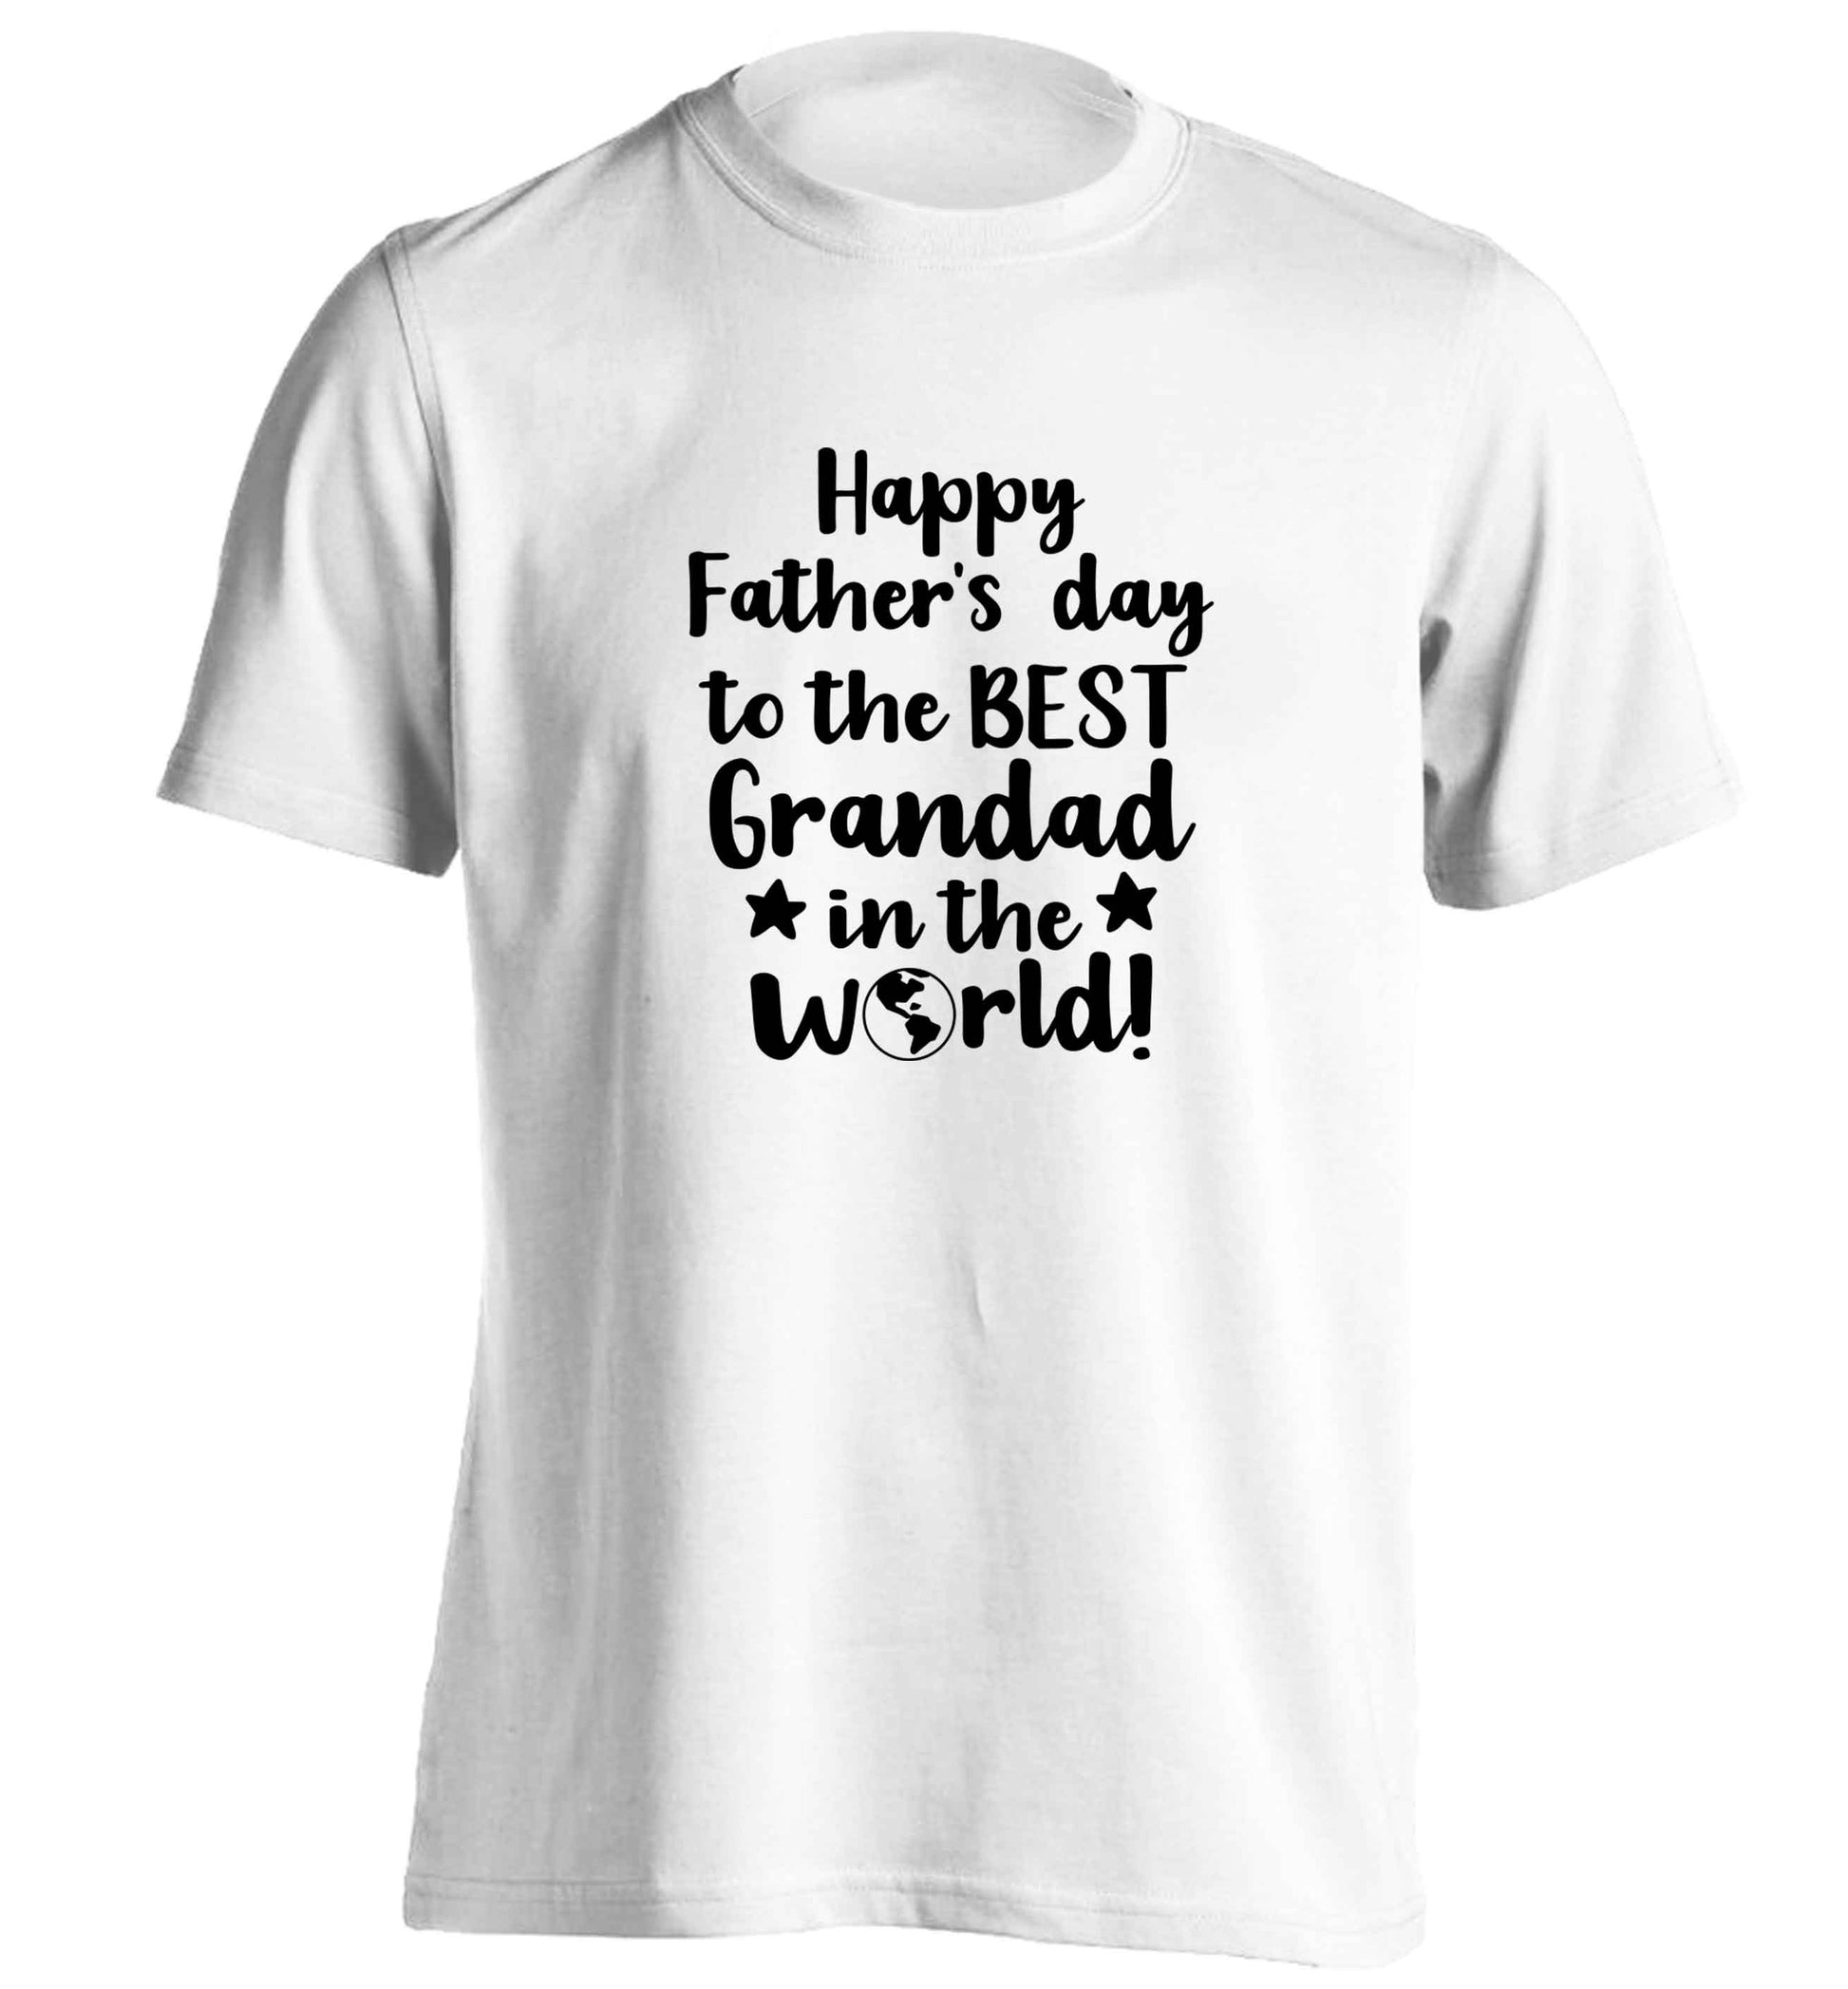 Happy Father's day to the best grandad in the world adults unisex white Tshirt 2XL